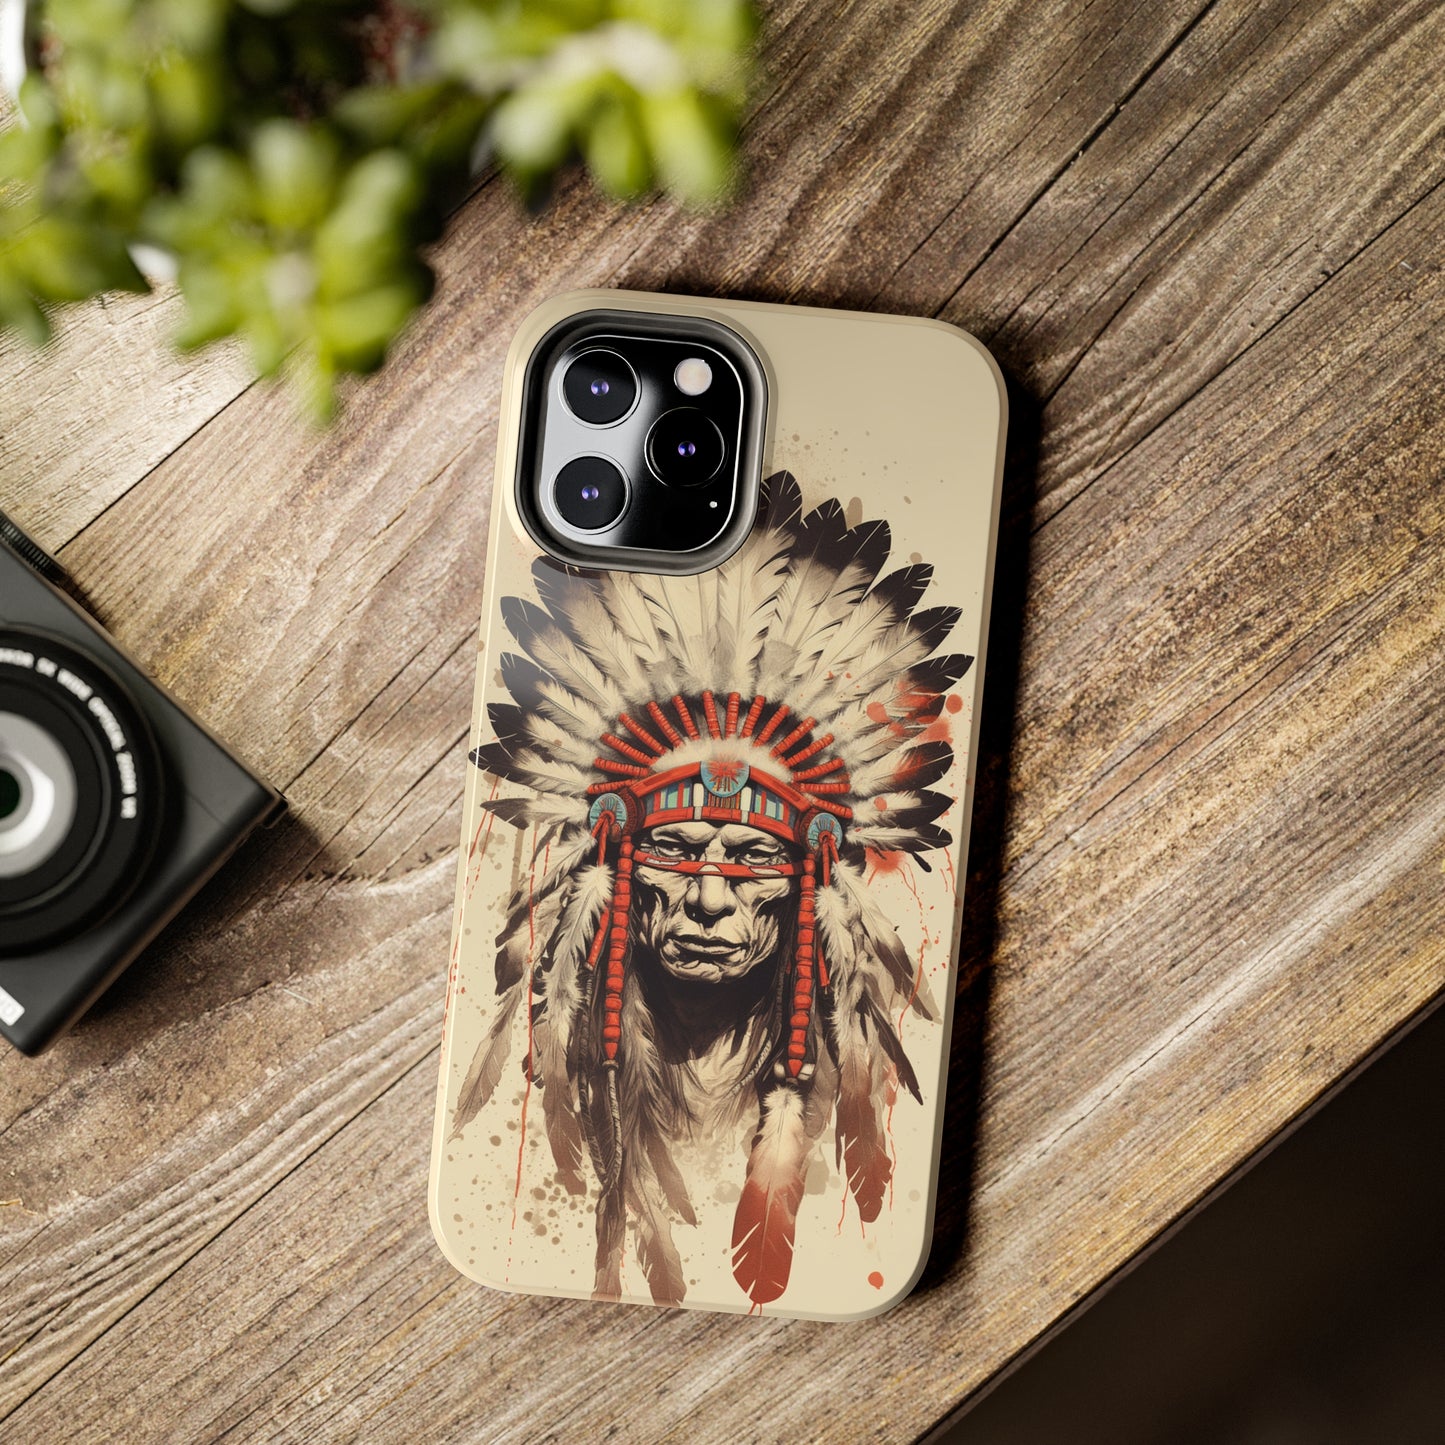 Proud Heritage: Native American Chief Headdress | Iconic Tribal iPhone Case for Models 11 through 14 Pro Max